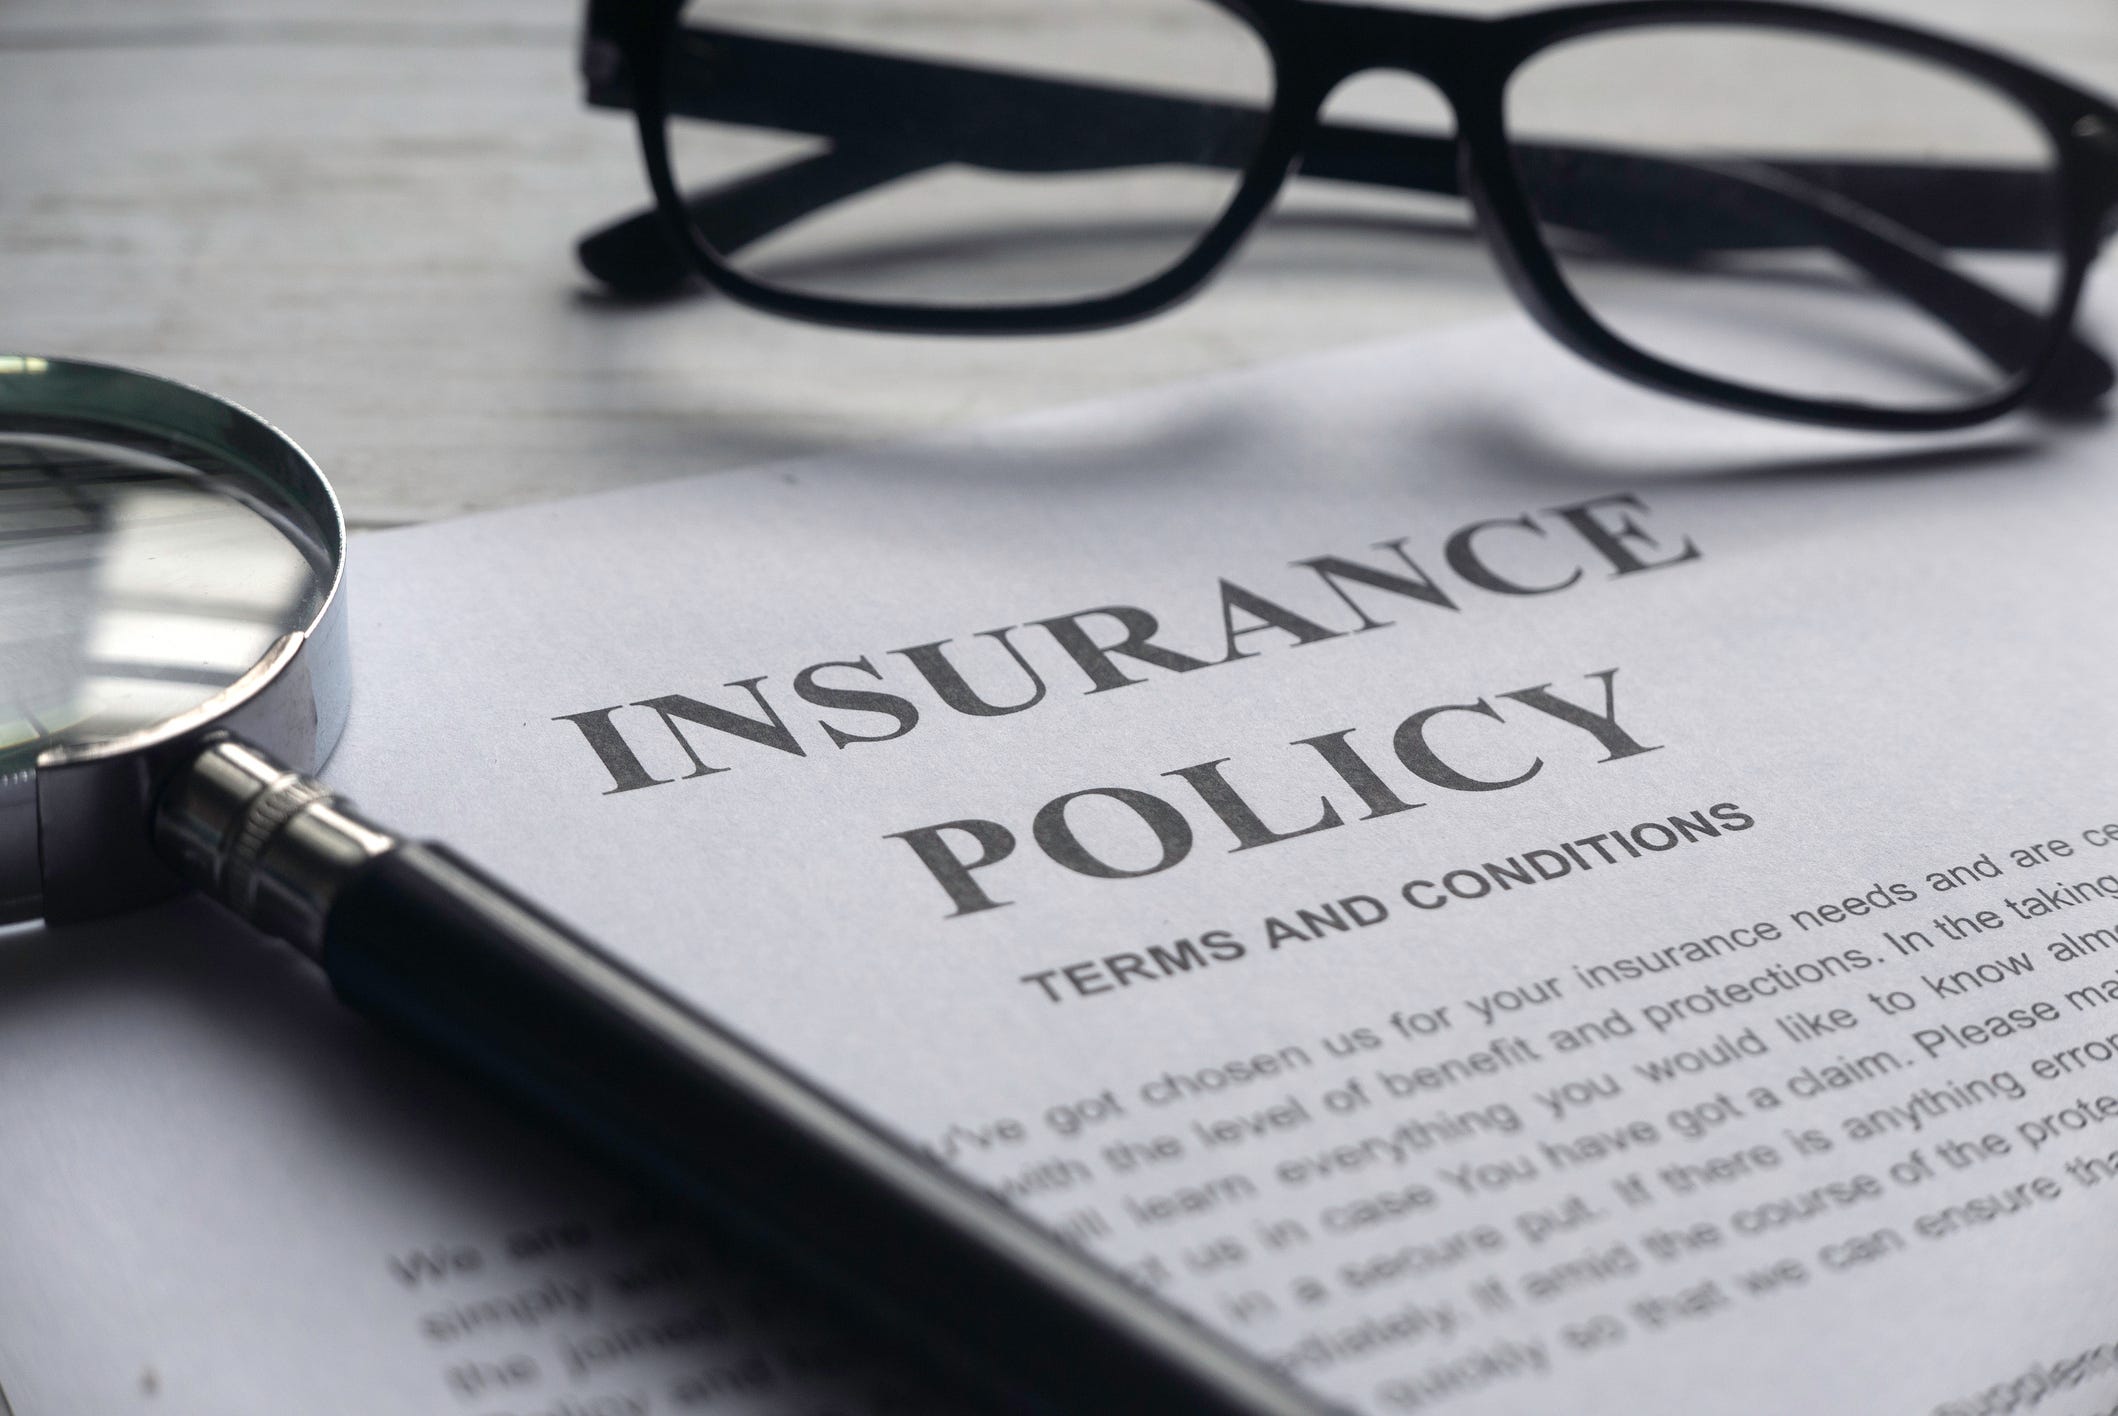 Condo questions: What's covered under HO-6 insurance and condo association master policy